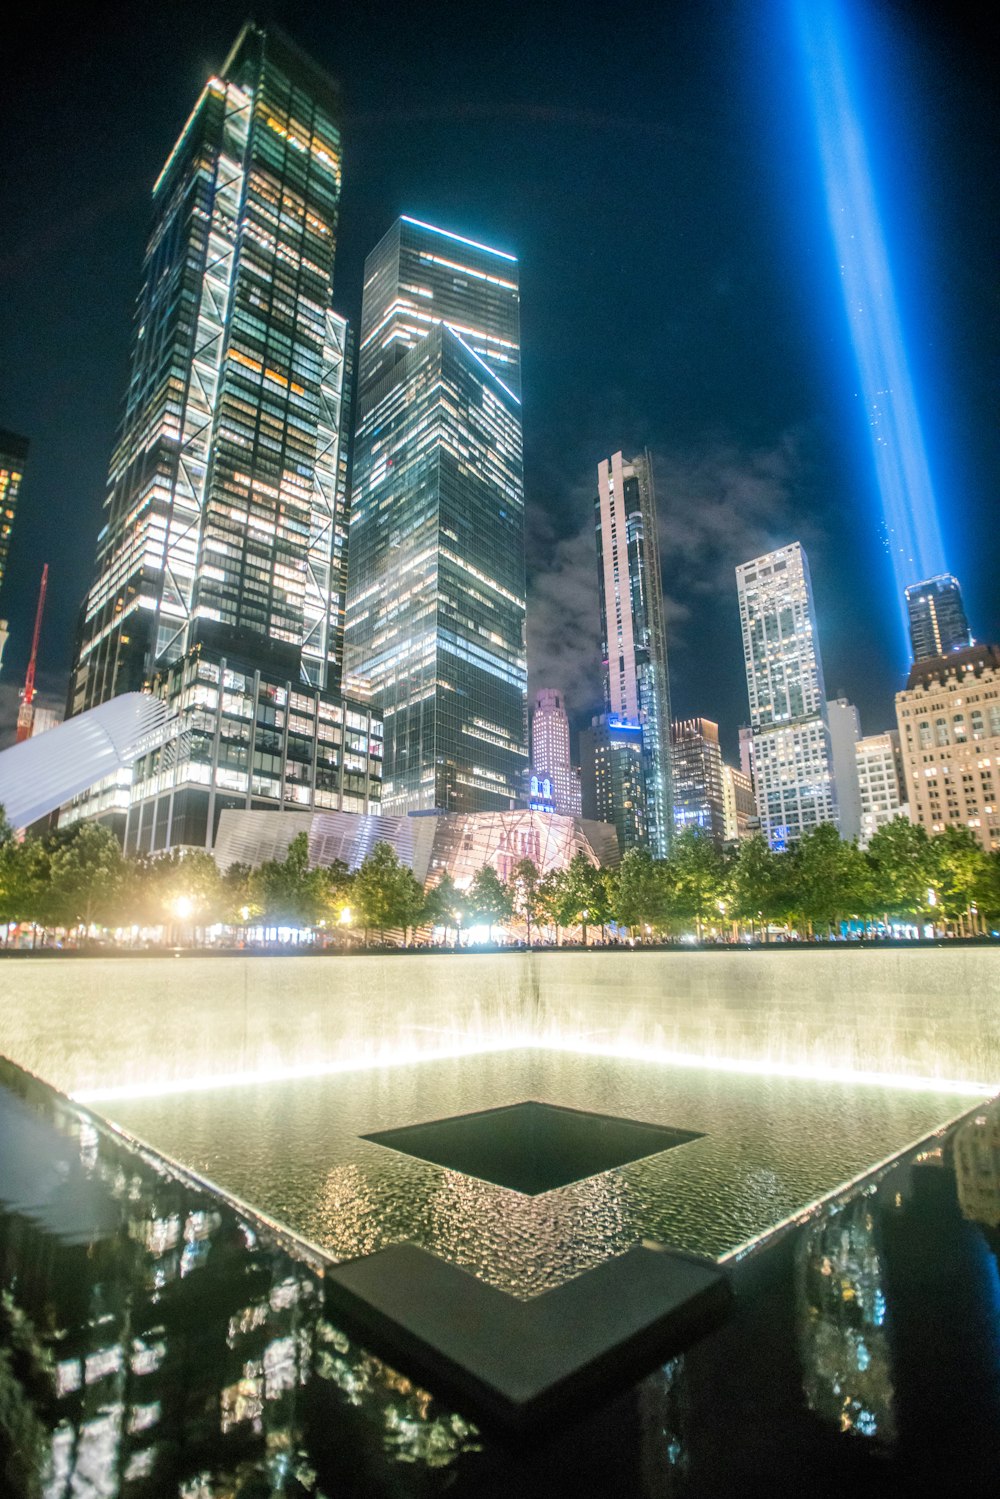 a view of the 9 / 11 memorial in new york city